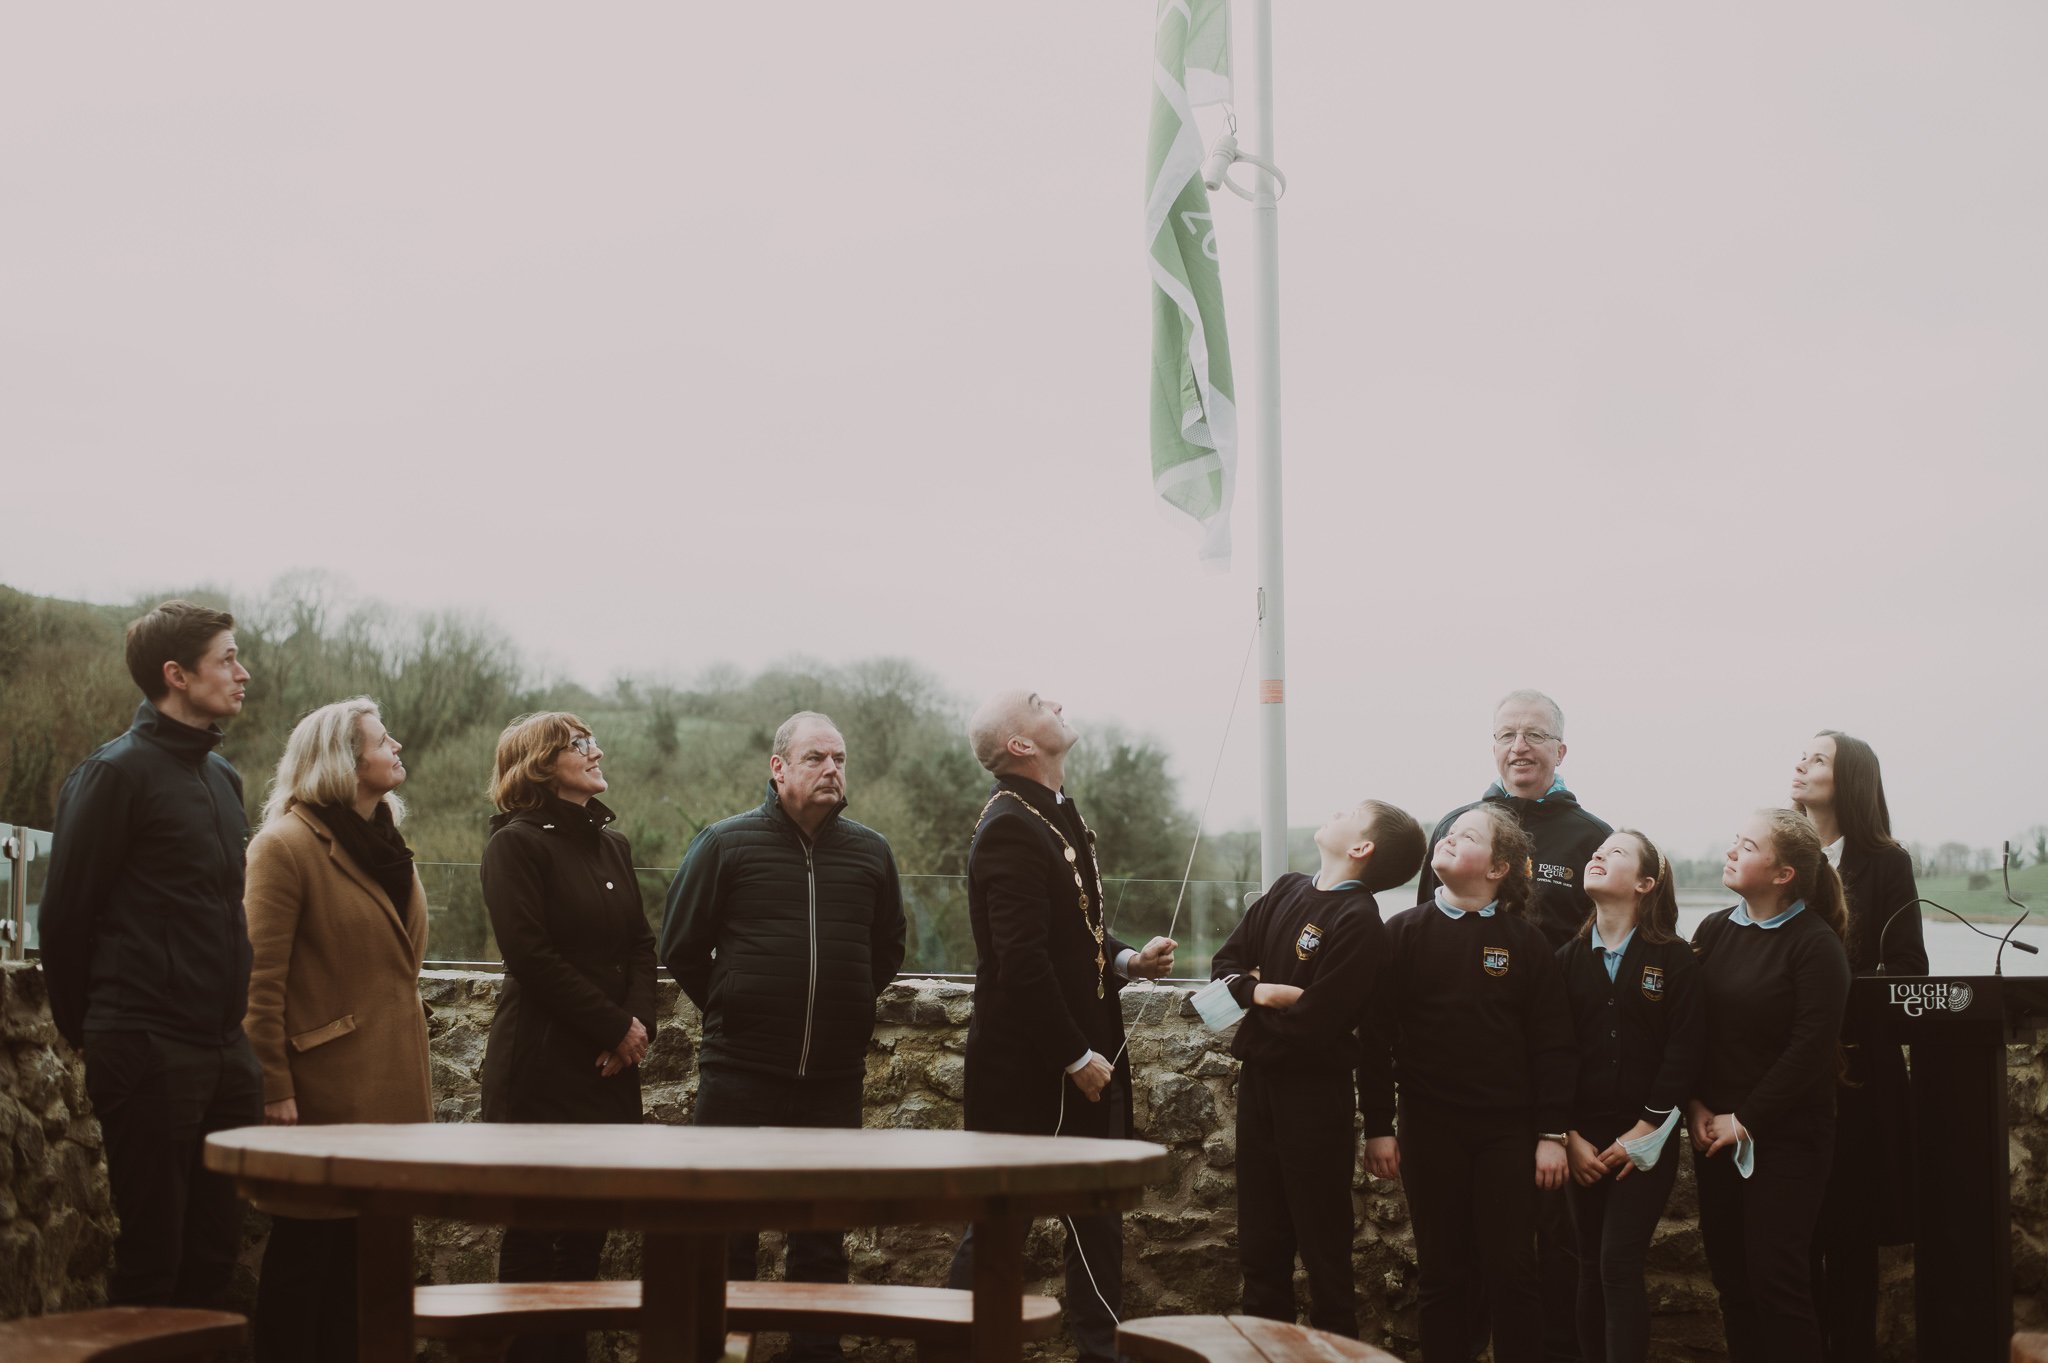 Lough Gur Green Flag - Pictured at the raising of the Lough Gur Green Flag is L-R Gavin Sheehan, Nuala Gallagher, Carmel Lynch and Donie Coffee all from Limerick City & County Council, Mayor Daniel Butler, (FR) Lough Gur National School Students, (BR) John Carew and Kate Harrold.